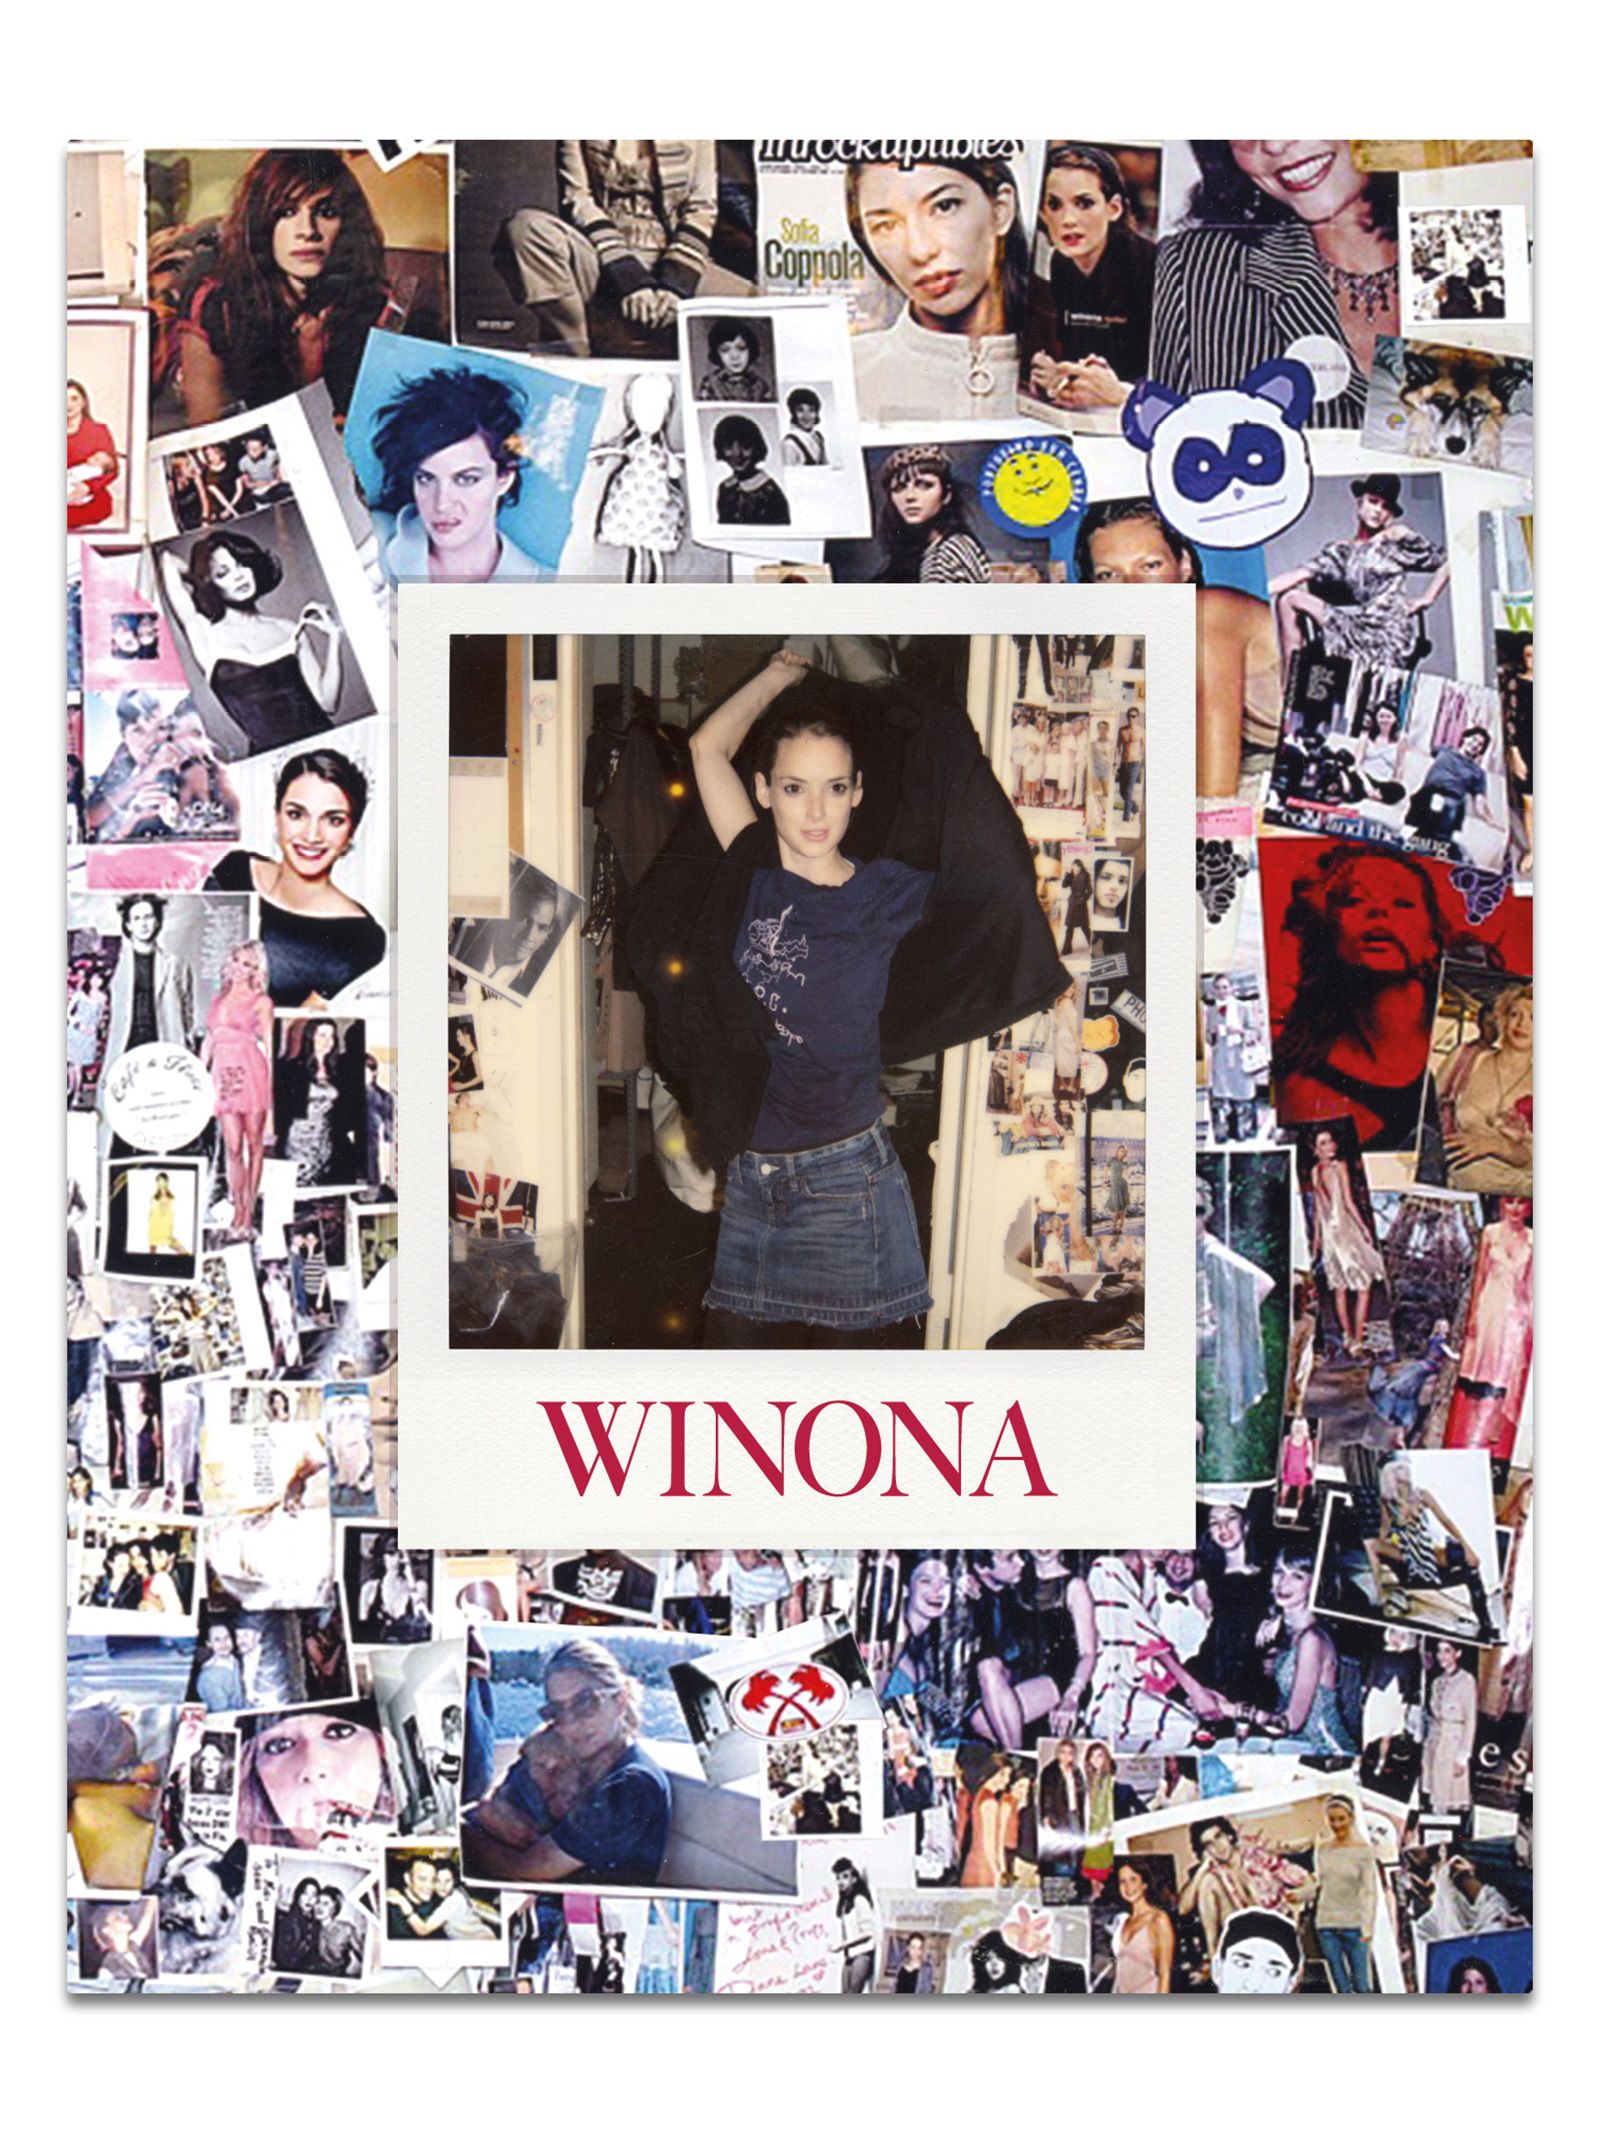 “Winona” is published by IDEA Books.